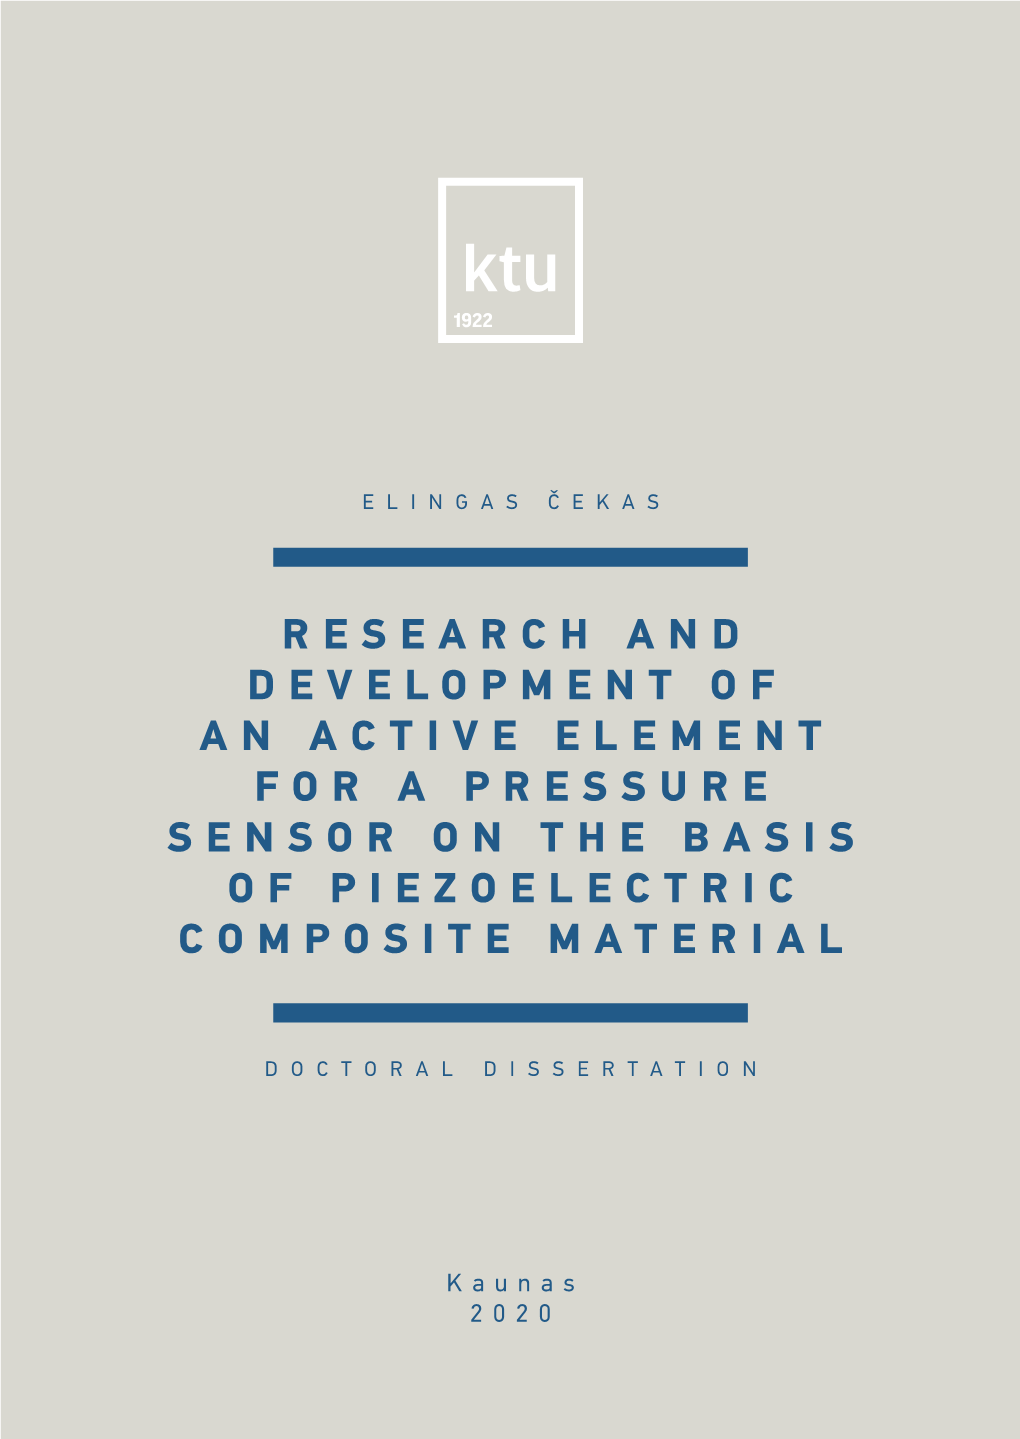 Research and Development of an Active Element for a Pressure Sensor on the Basis of Piezoelectric Composite Material